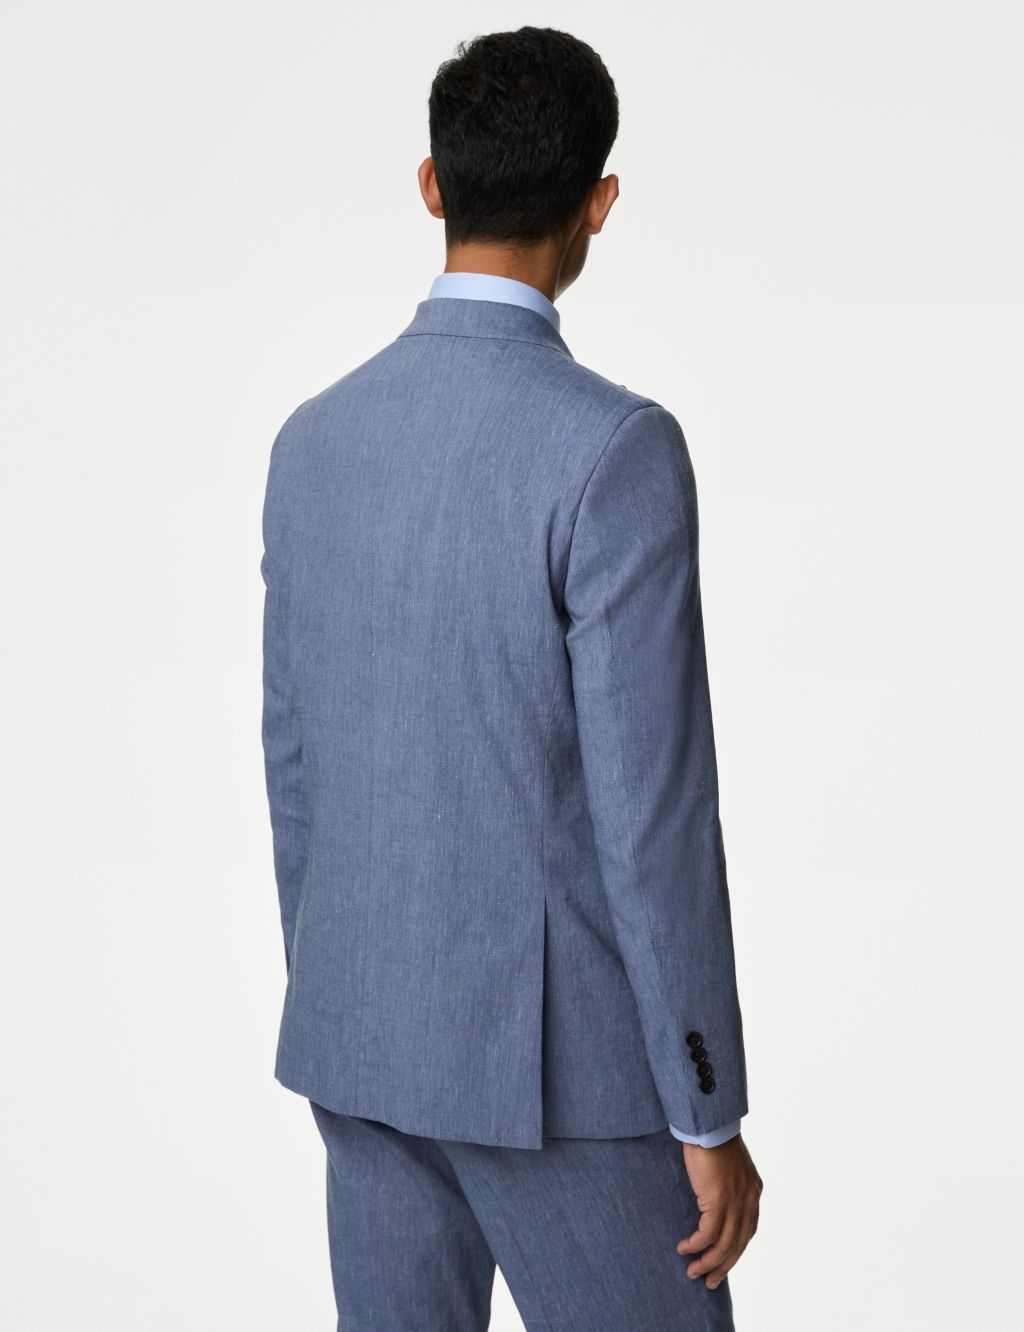 Tailored Fit Italian Linen Miracle™ Suit Jacket image 5